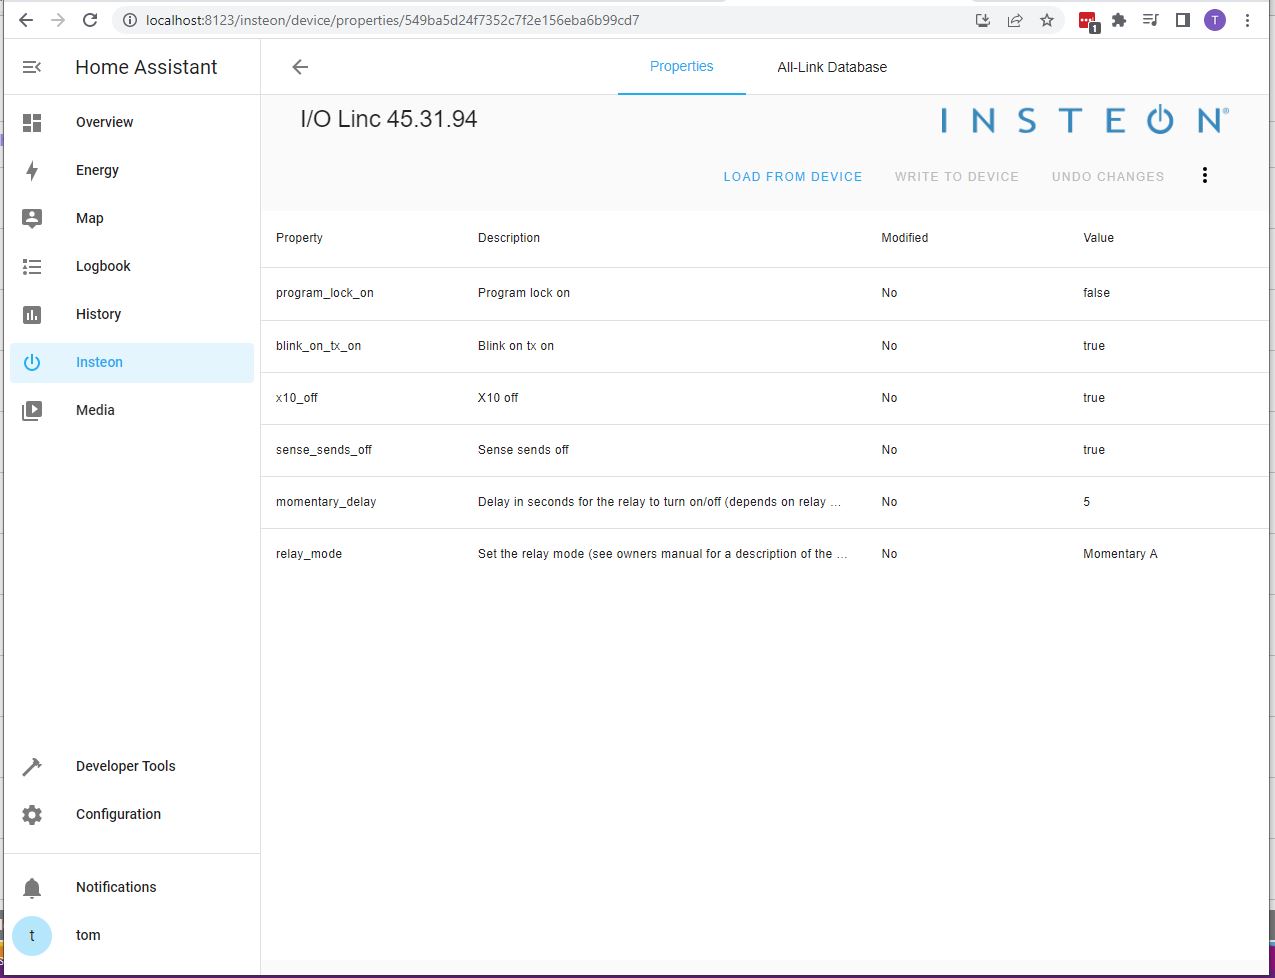 Another screenshot of the upcoming Insteon page